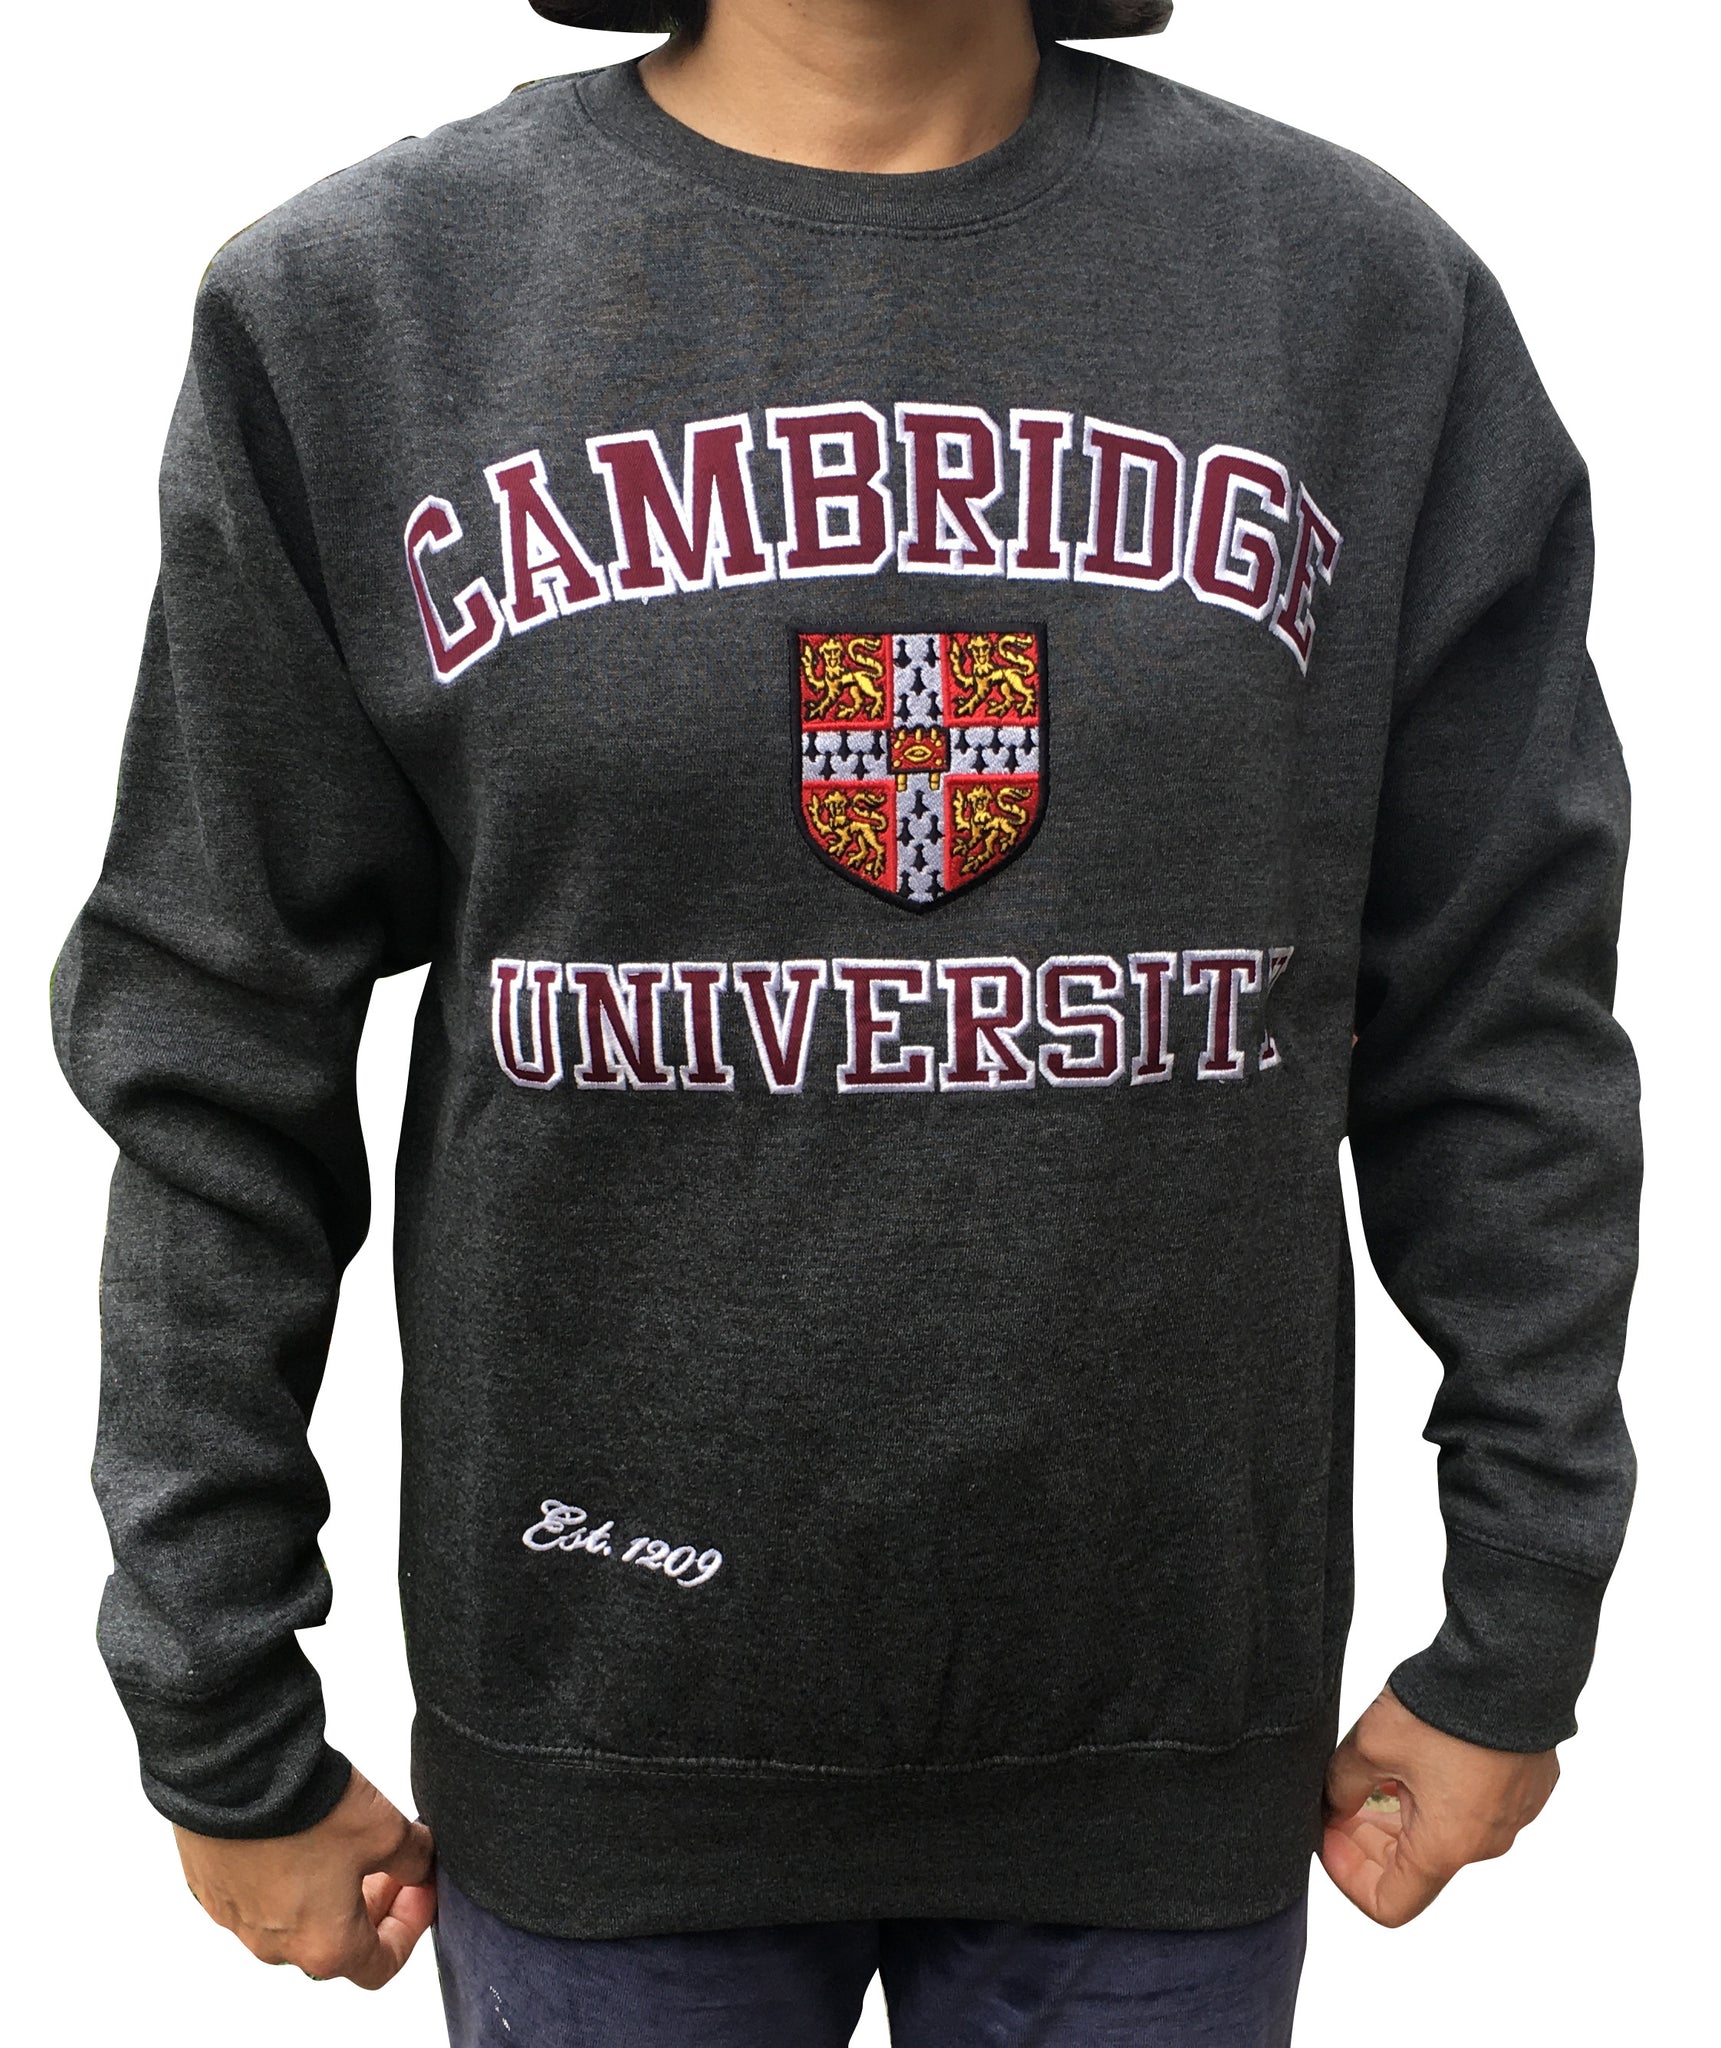 Cambridge University Embroidered Sweatshirt - Charcoal - Official Apparel of the Famous University of Cambridge